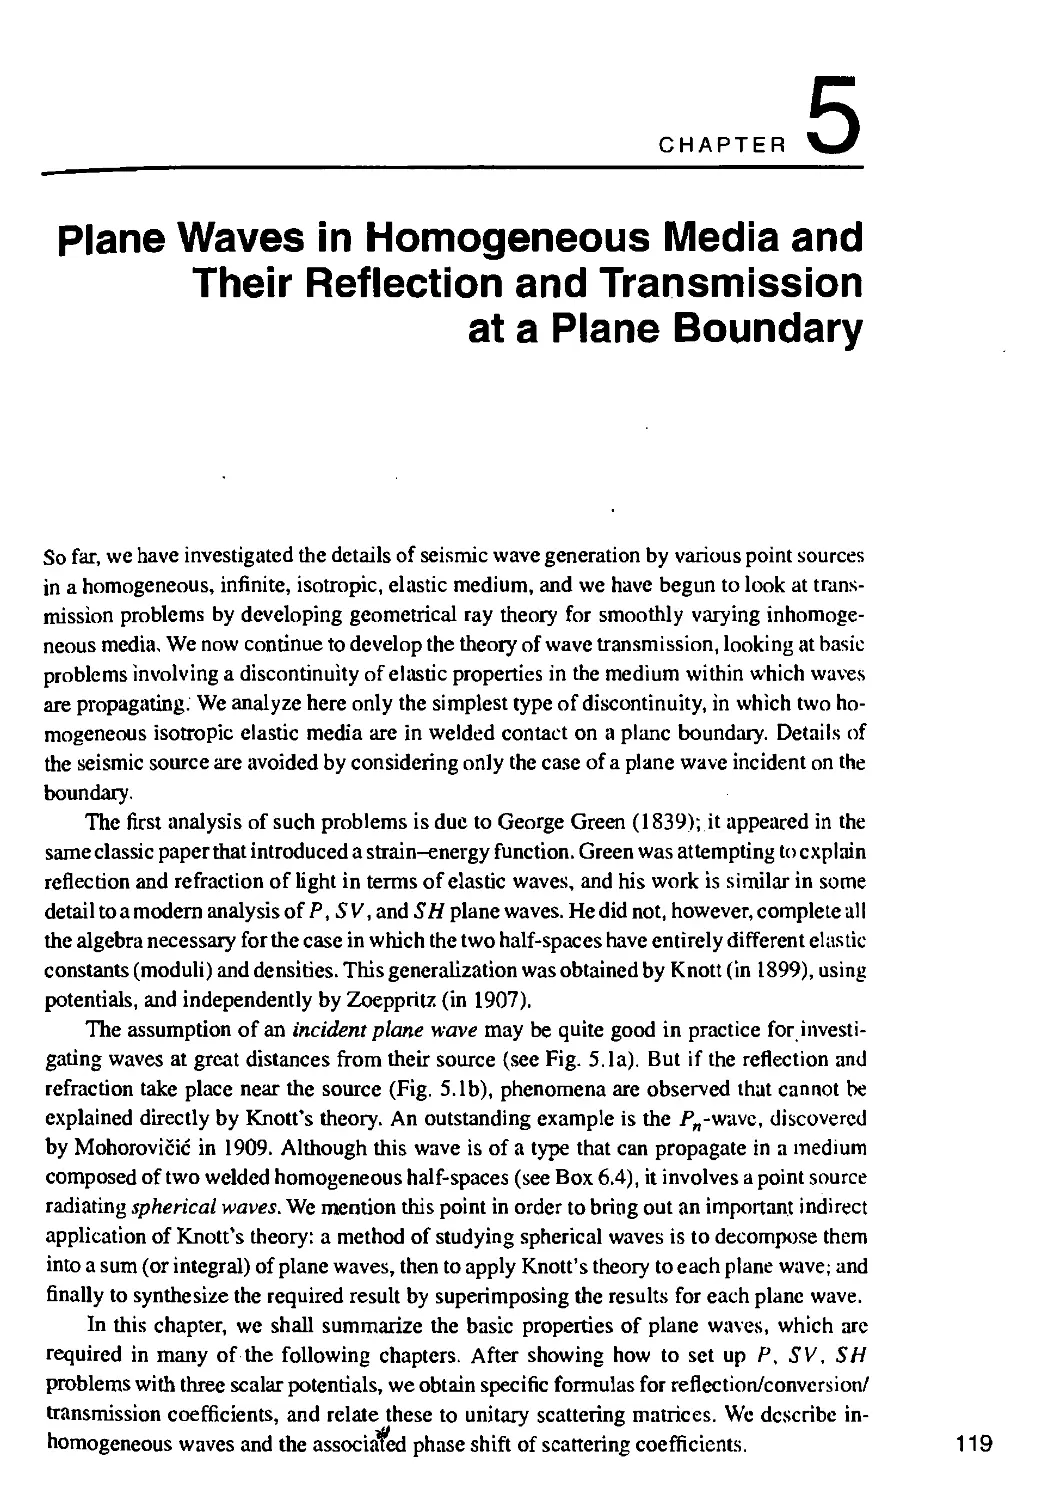 5. PLANE WAVES IN HOMOGENEOUS MEDIA AND THEIR REFLECTION AND TRANSMISSION AT A PLANE BOUNDARY